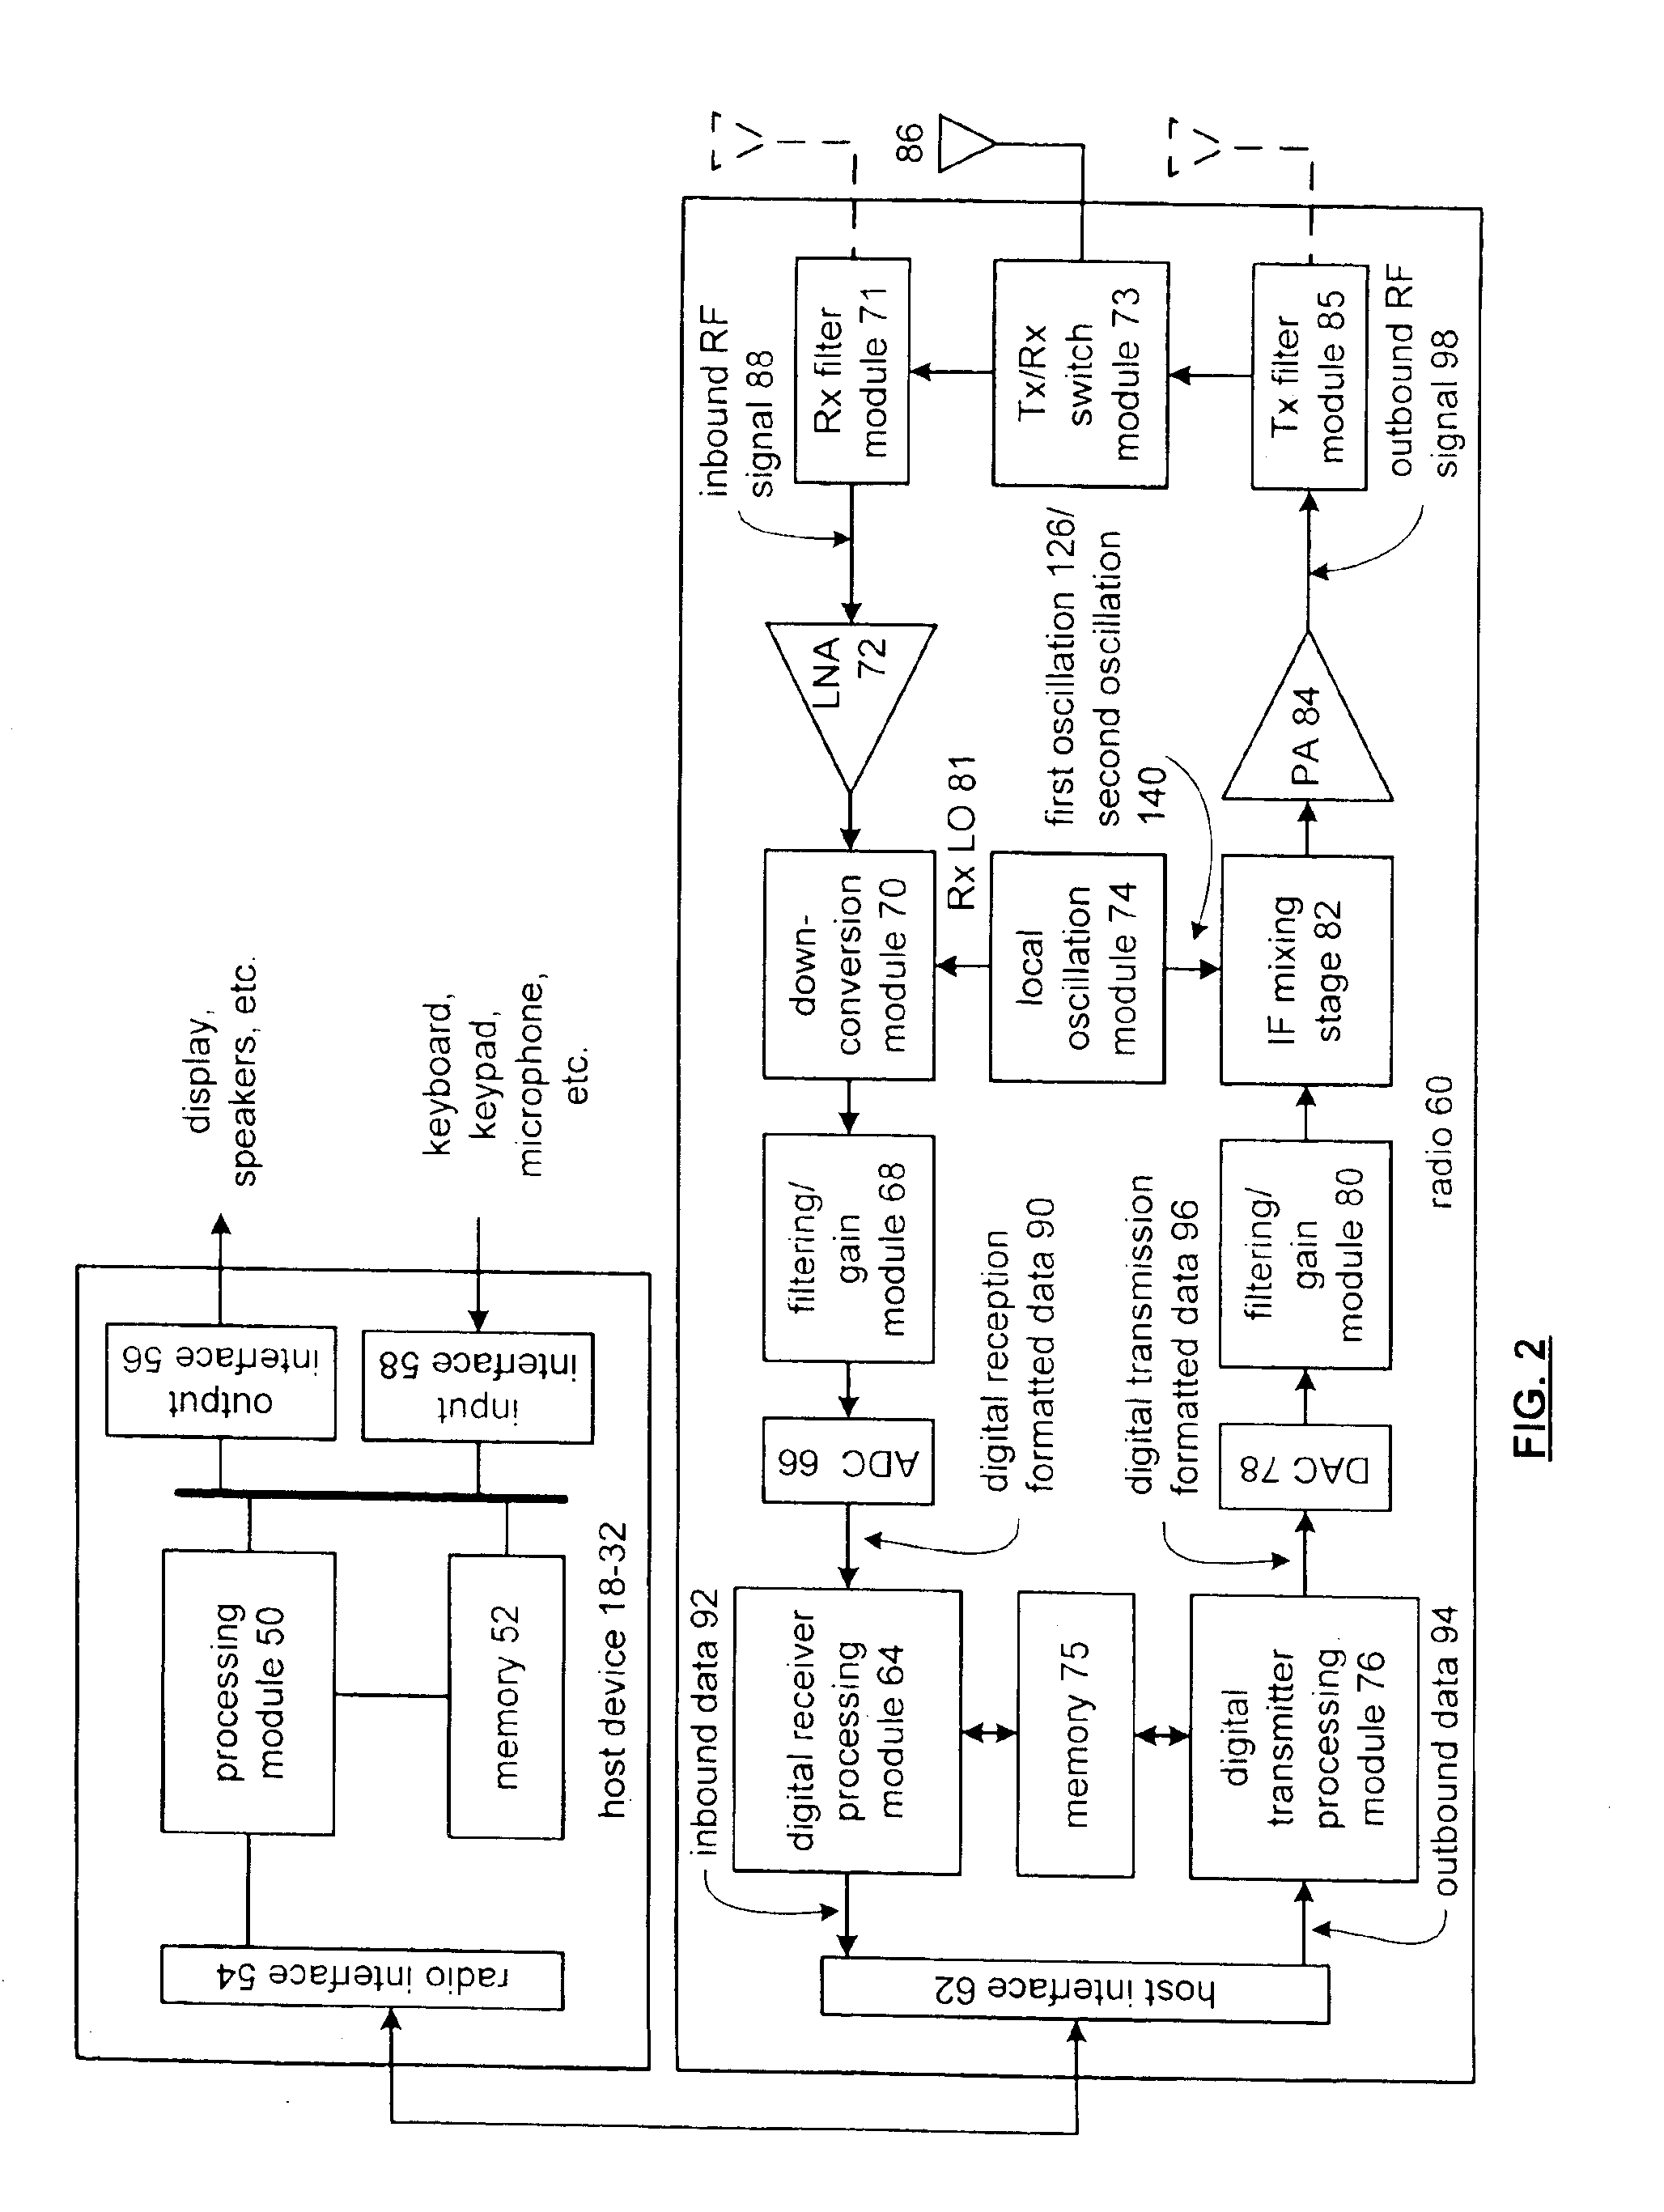 Method of scalable gray coding